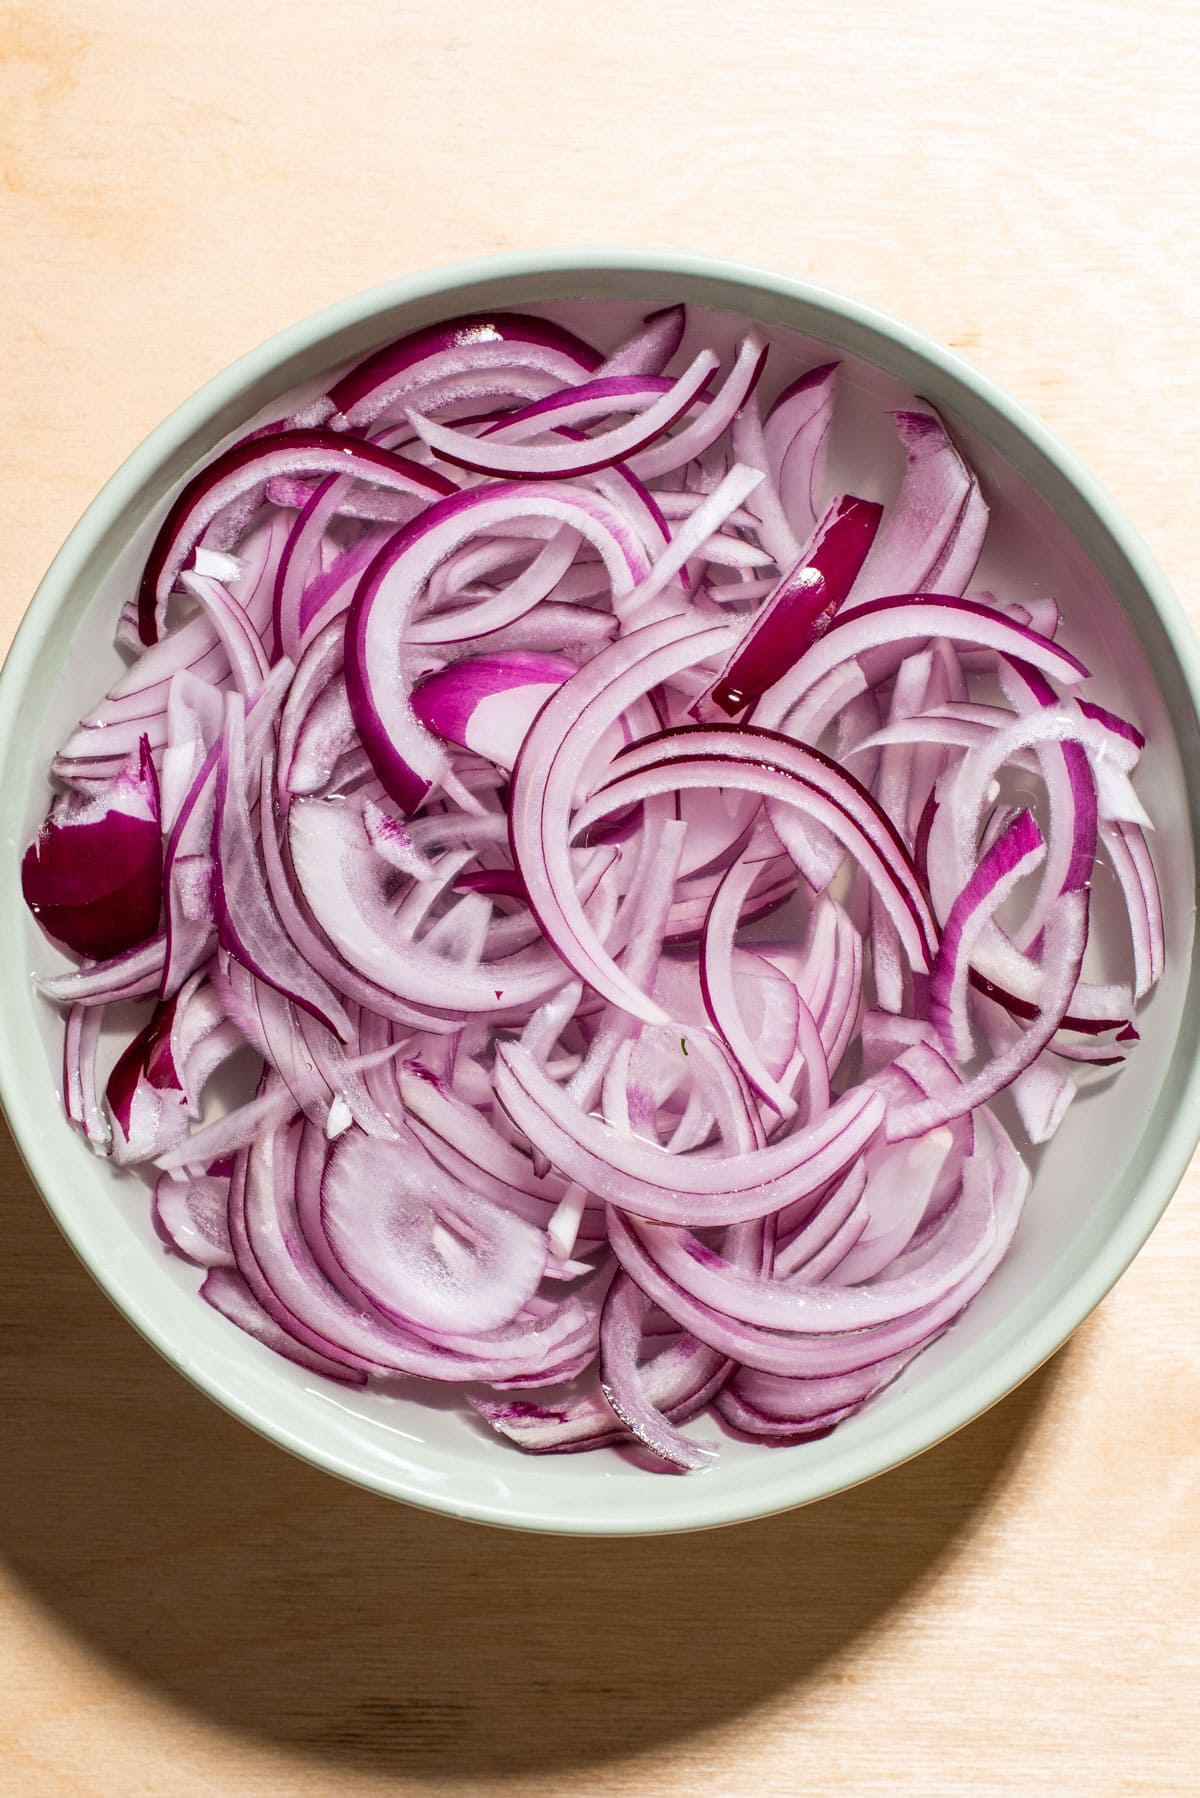 Red onions soaking in a bowl of water.